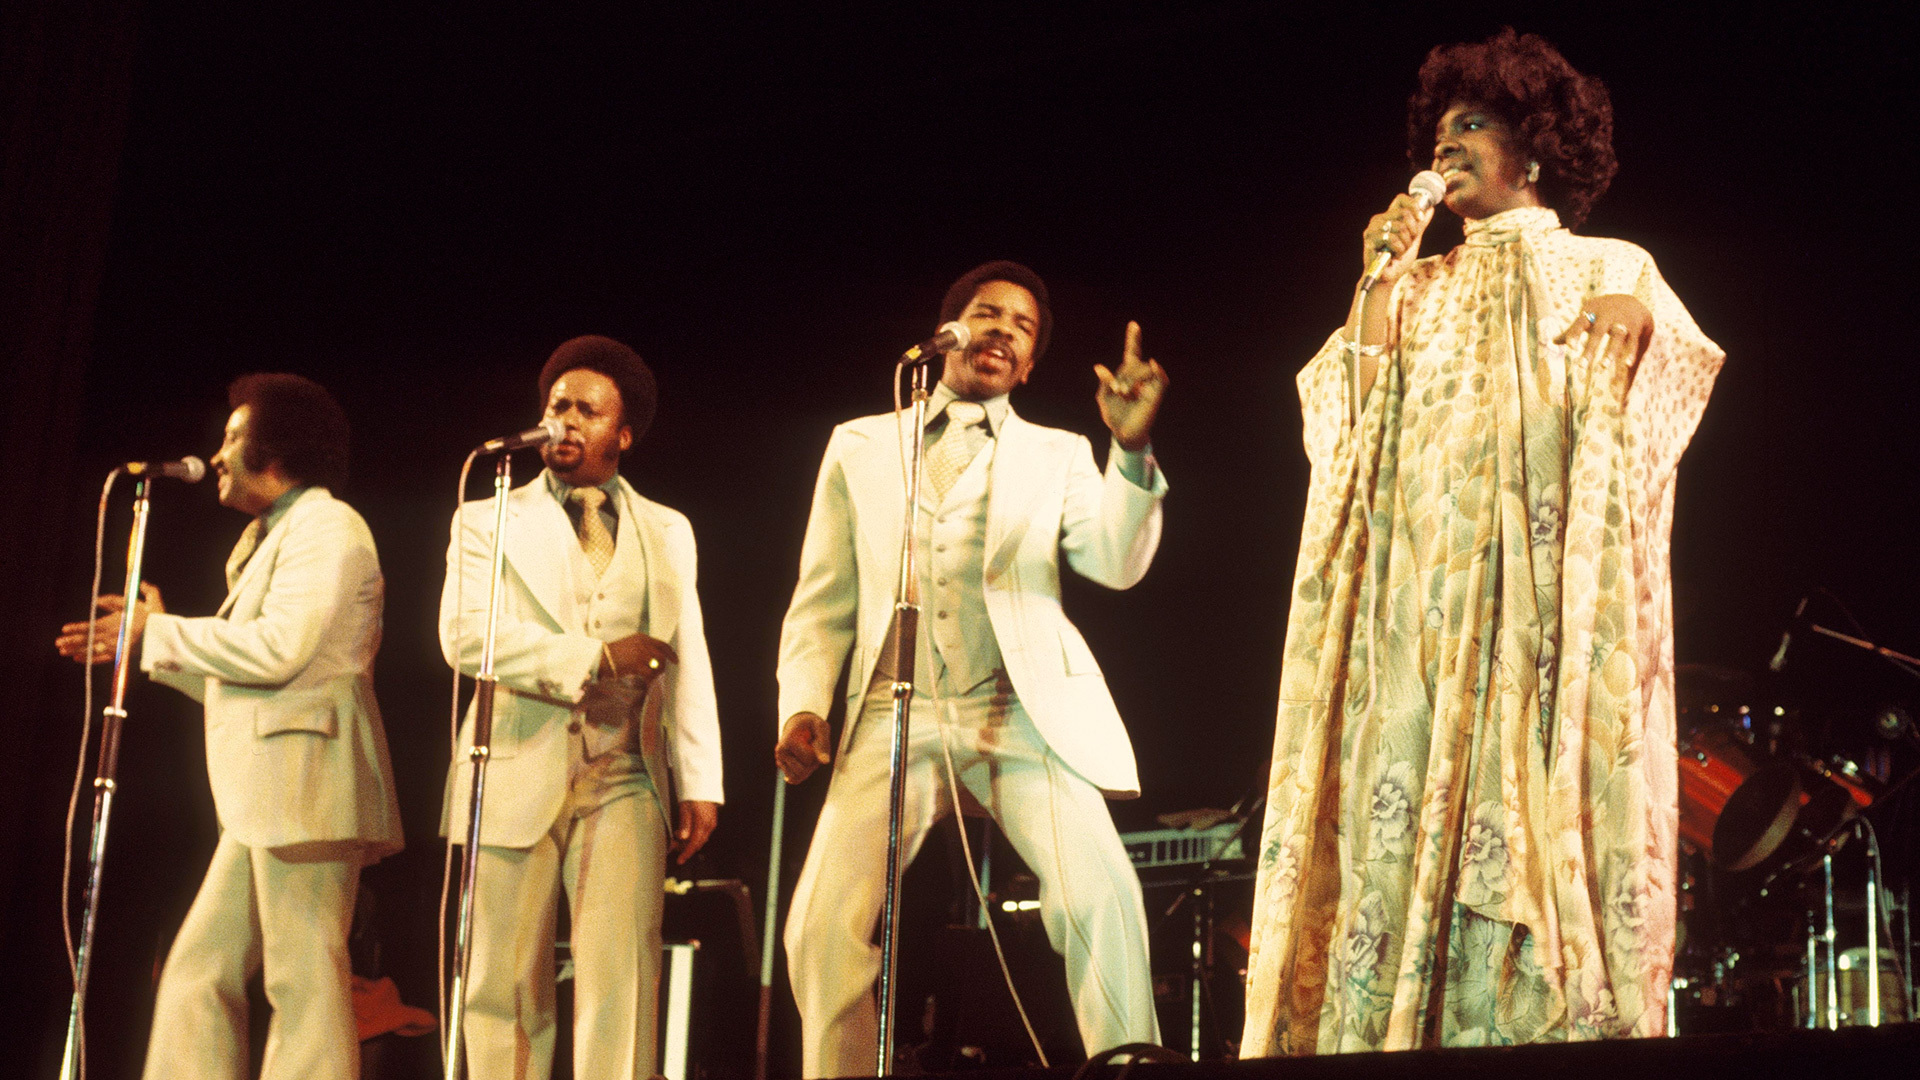 October 27, 1973 : “Midnight Train To Georgia” by Gladys Knight & The Pips Hit No. 1